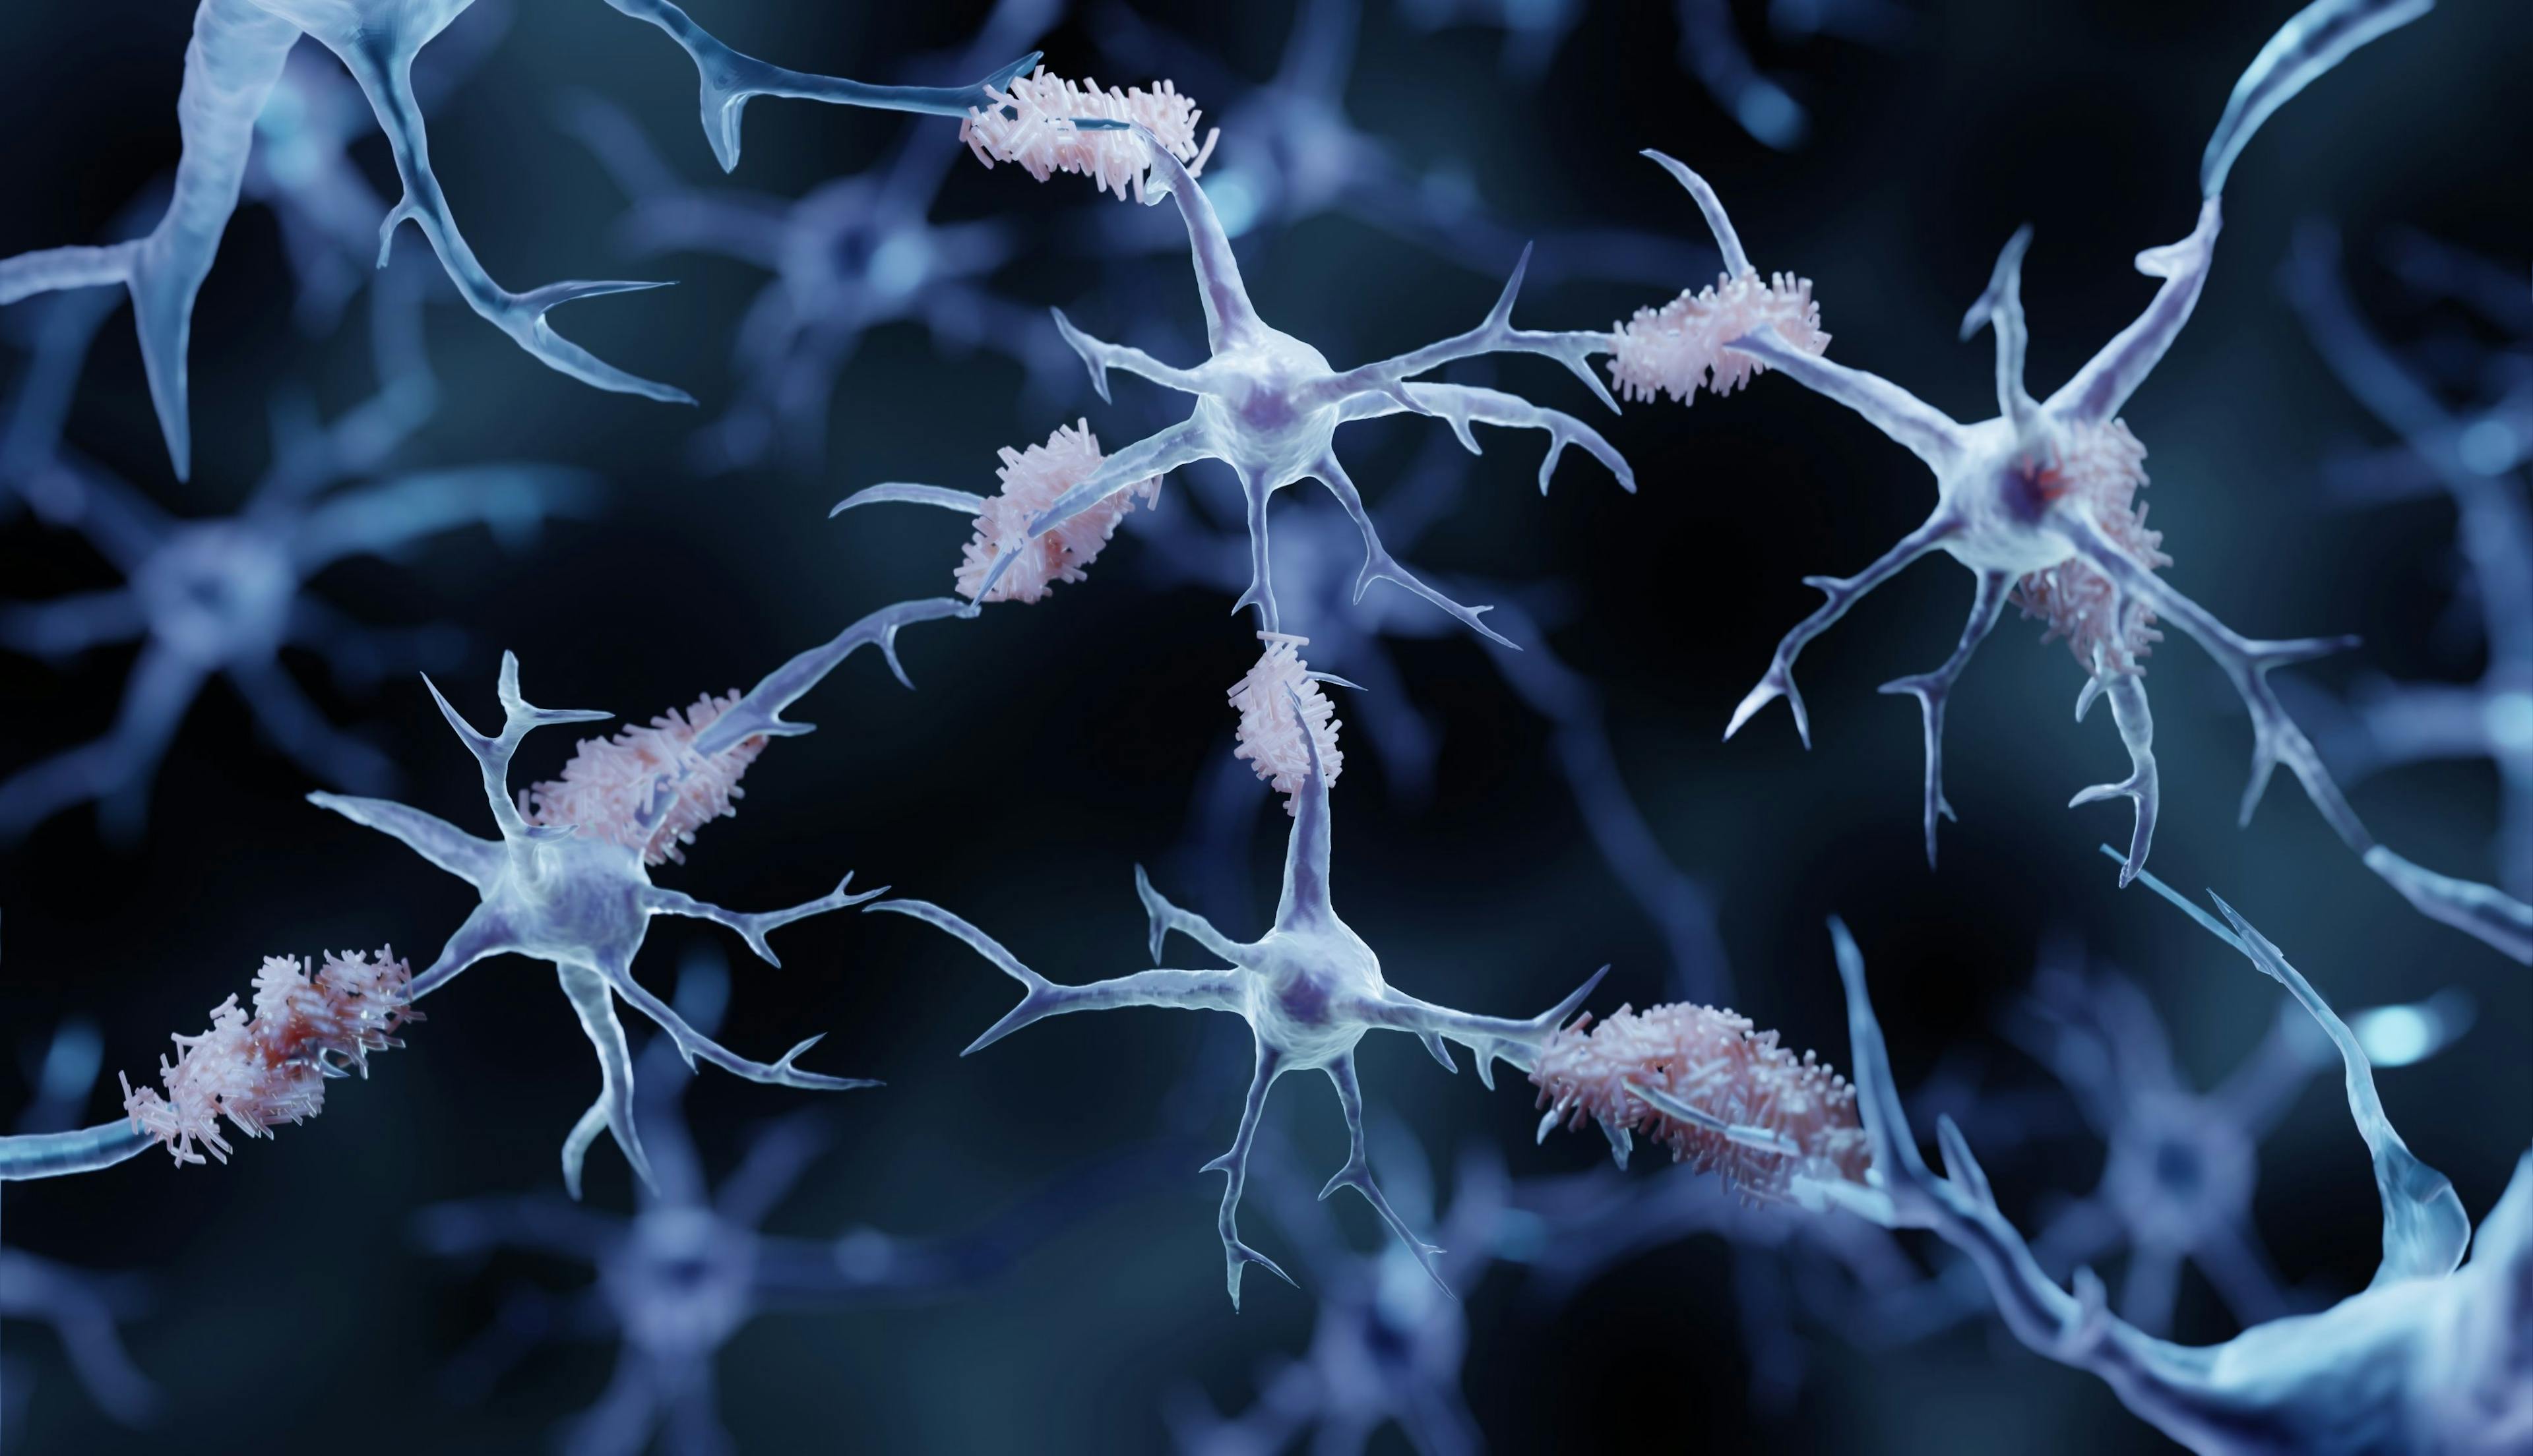 Nearly 7 million Americans are living with Alzheimer disease. | Image credit: Artur - stock.adobe.com